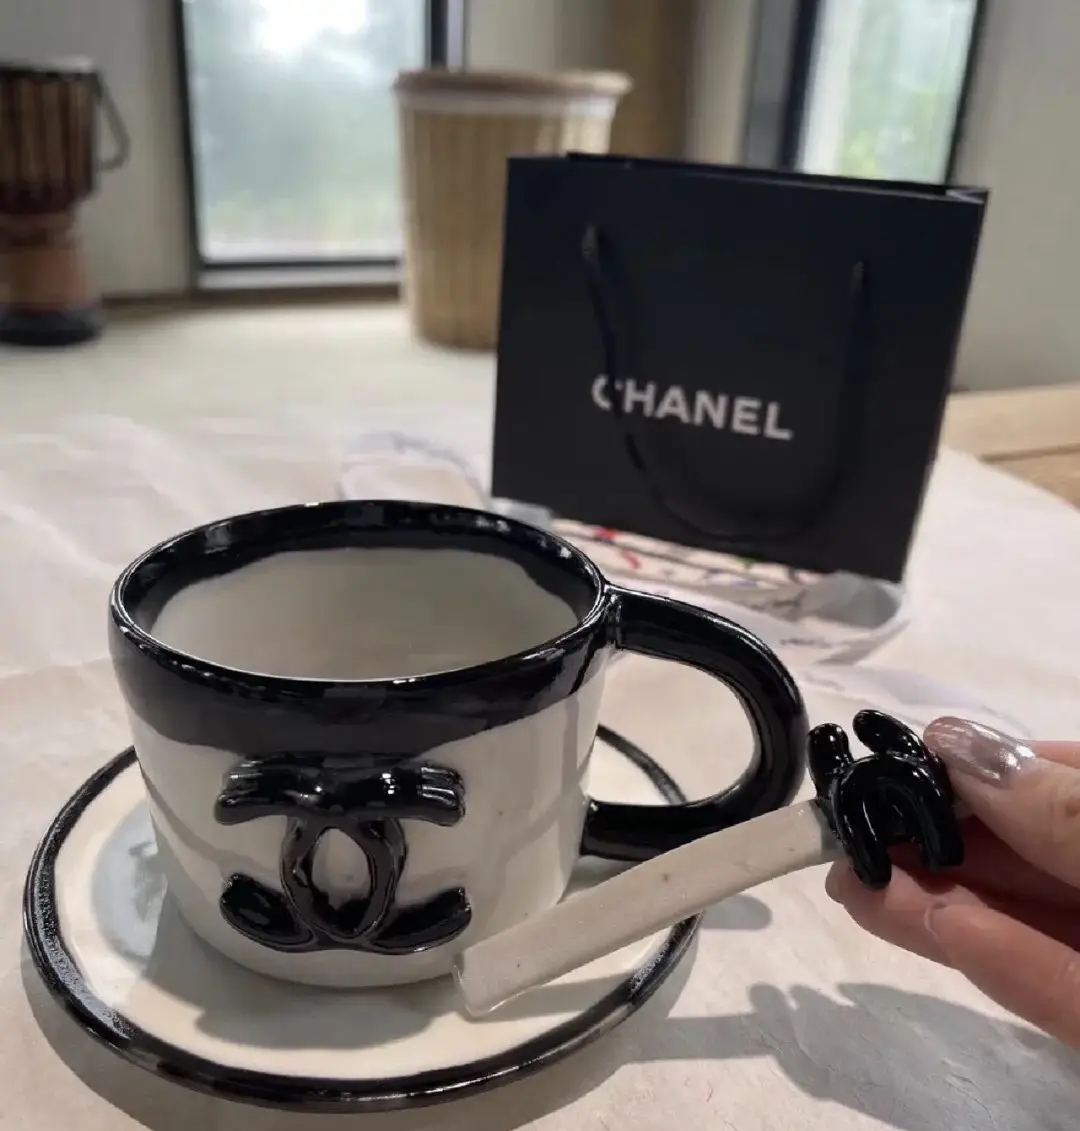 Chanel mug issued ?, Gallery posted by Mugcollector